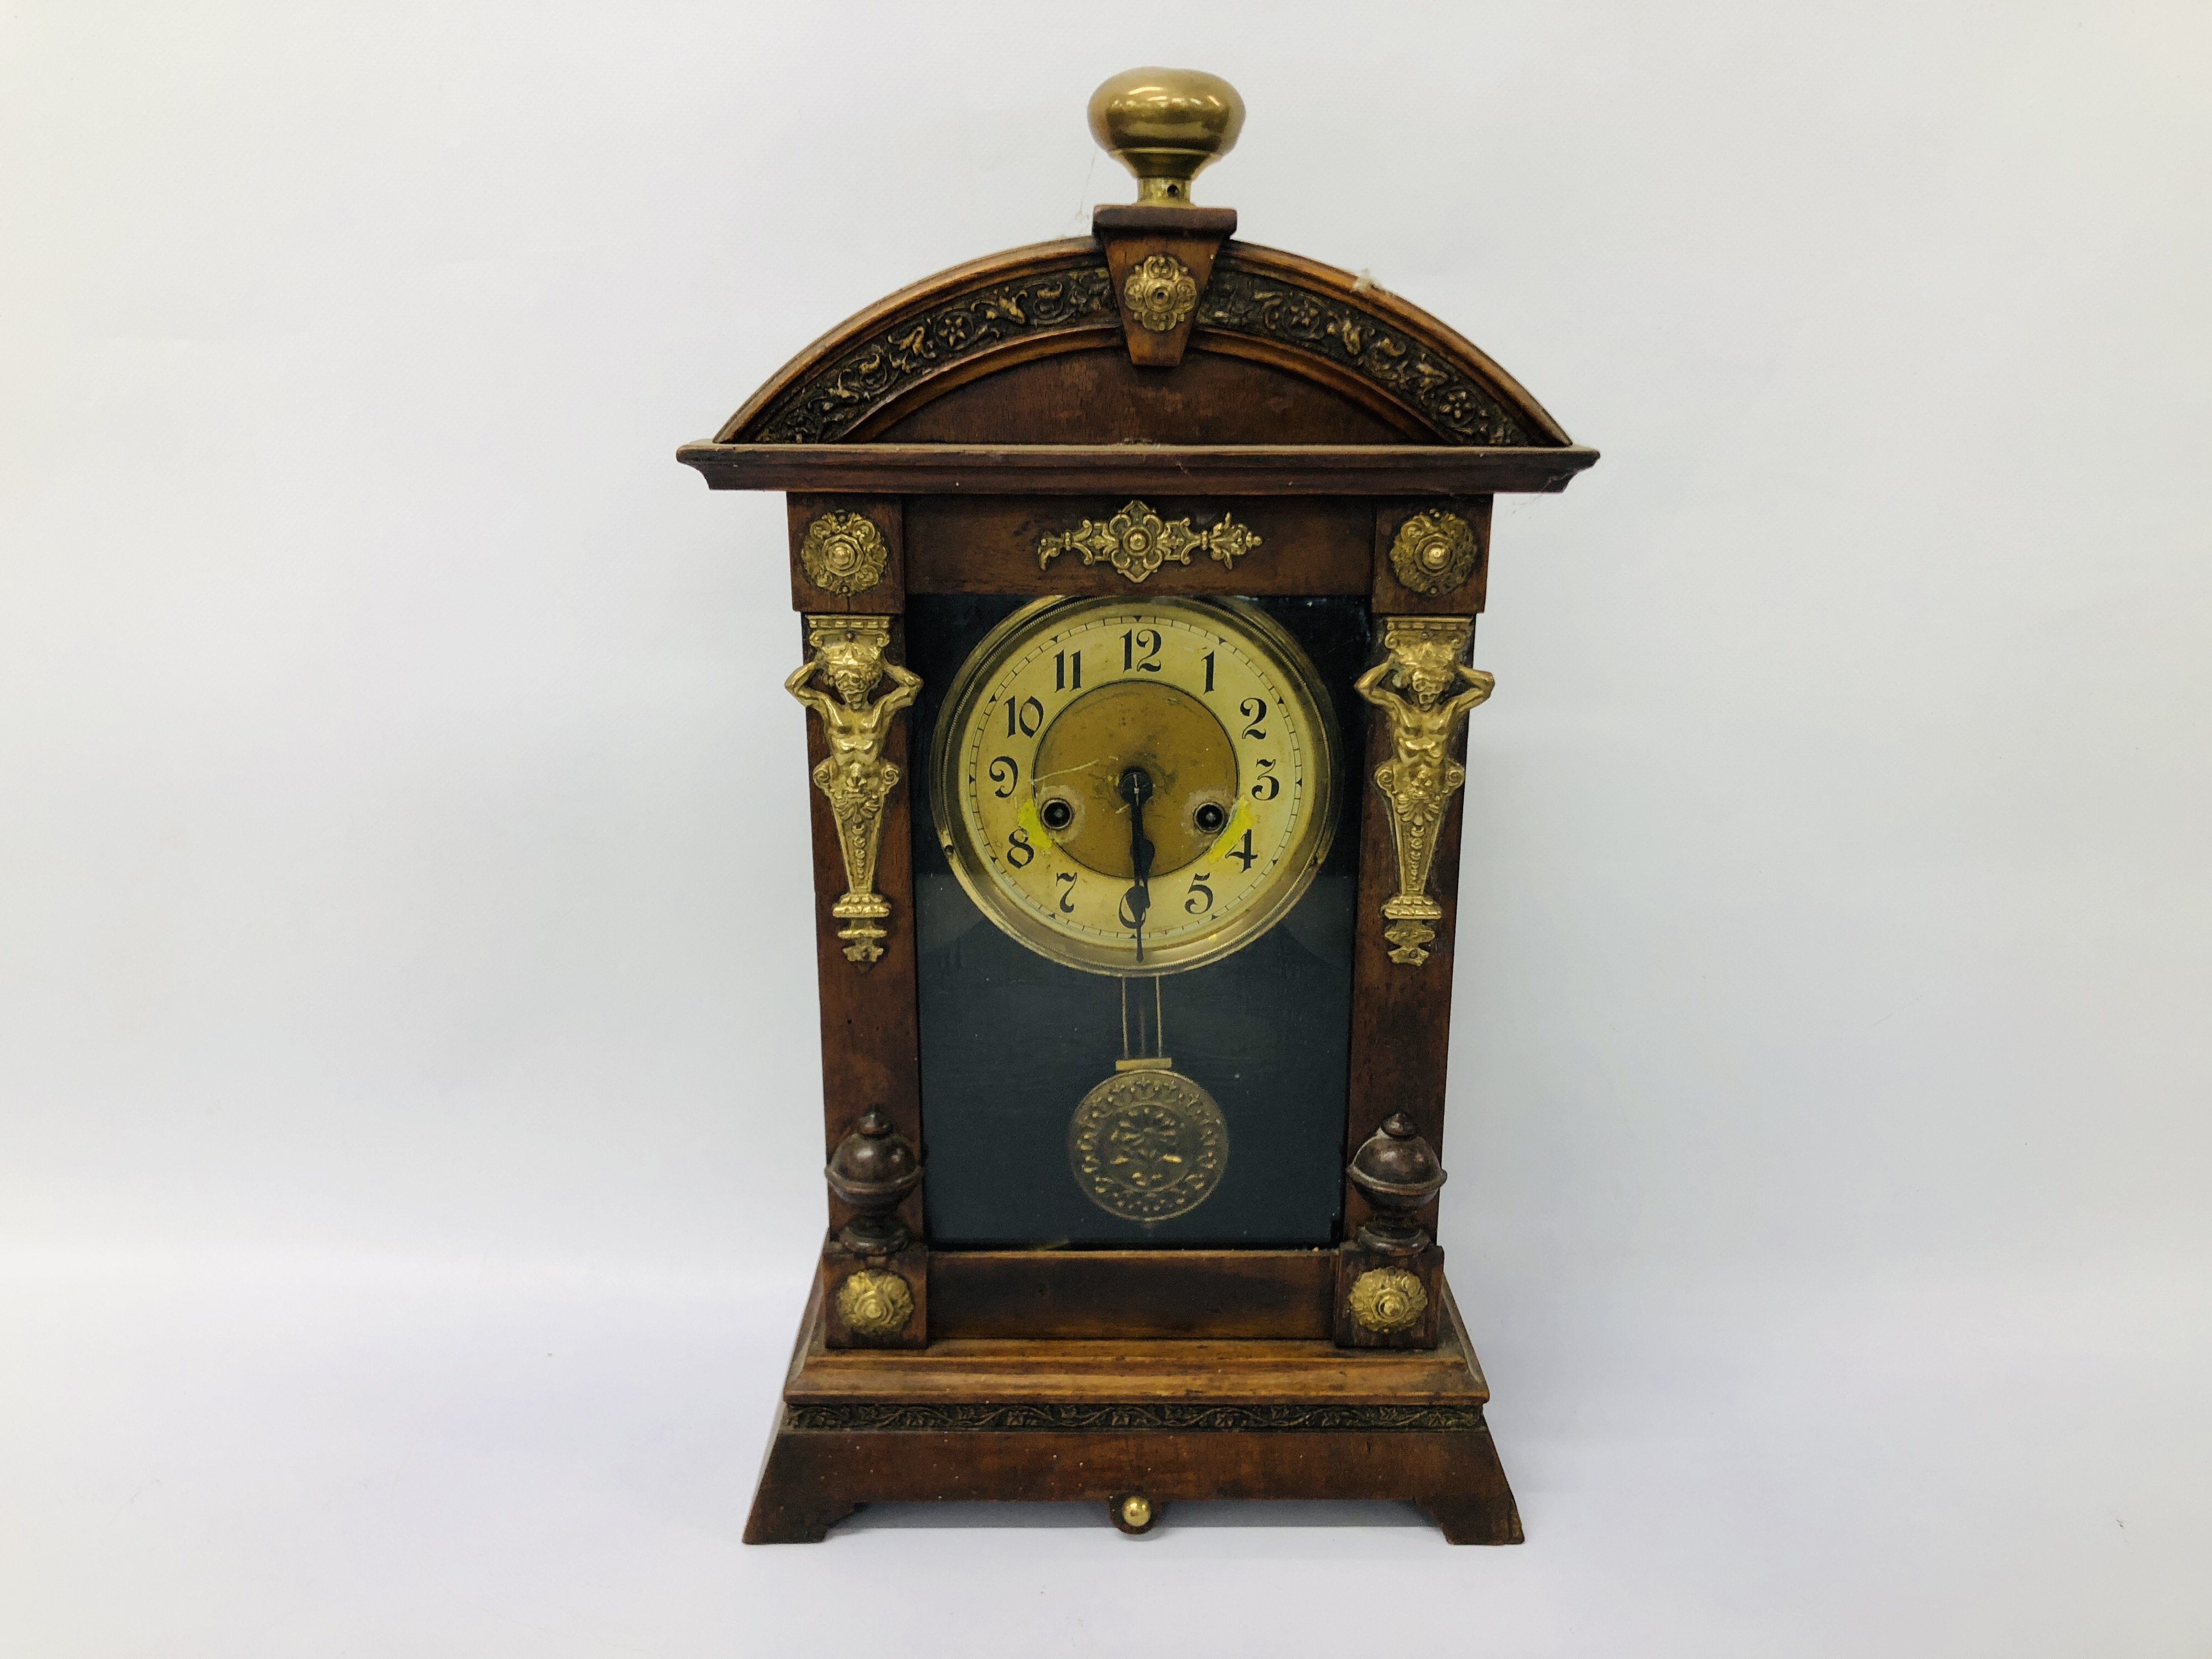 VINTAGE MAHOGANY CASED MANTEL CLOCK WITH APPLIED BRASS DETAIL - H 45CM.